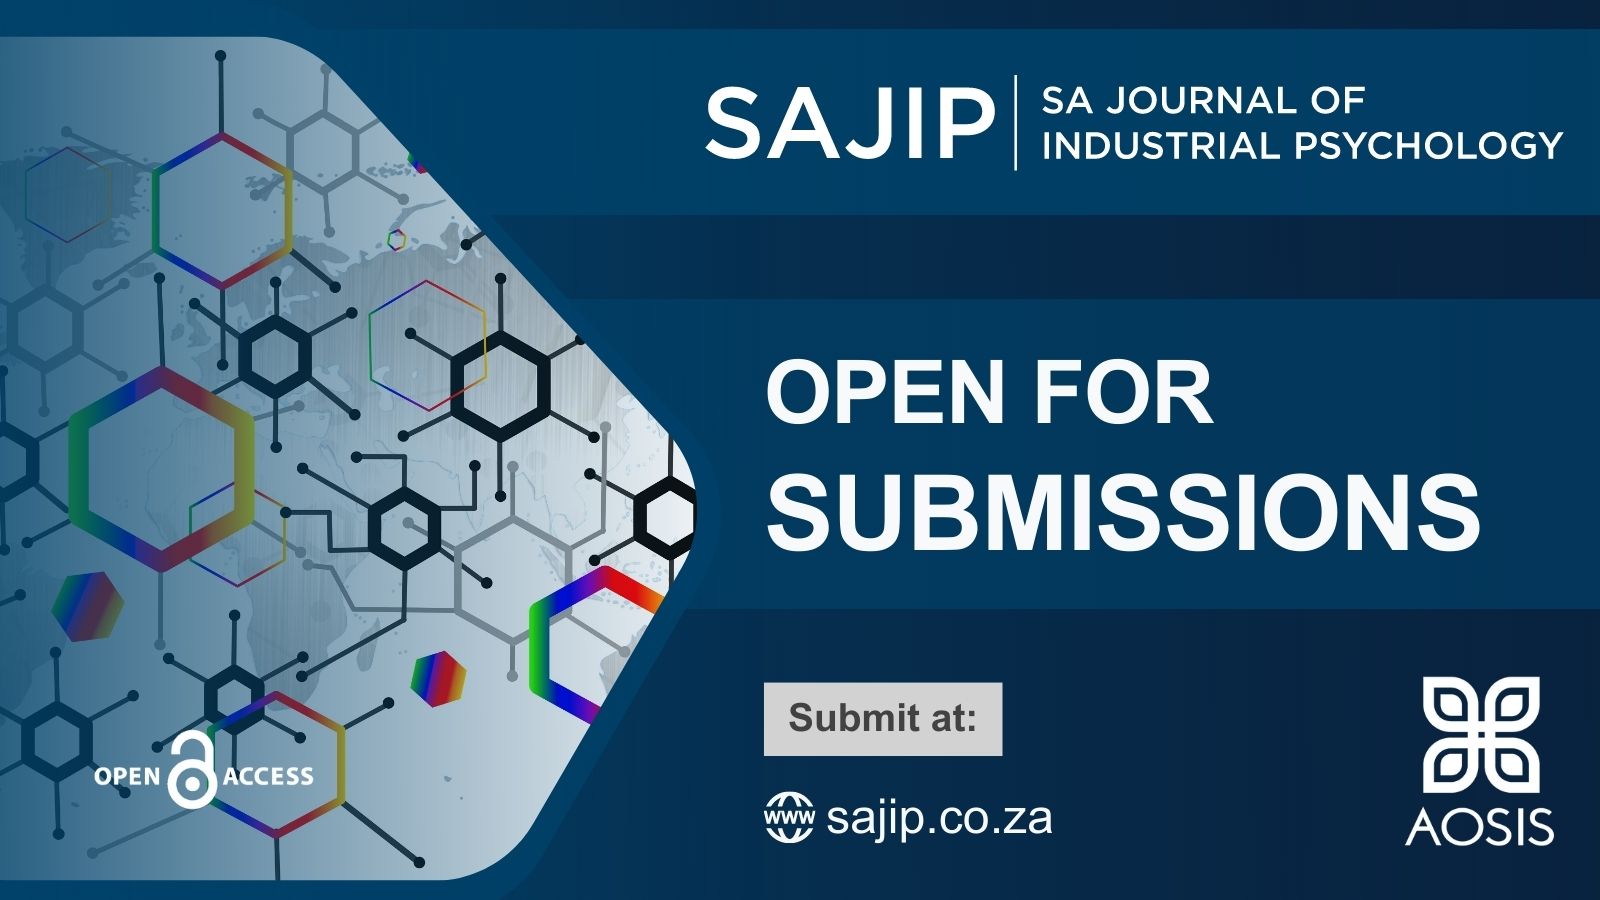 SAJIP Open for submissions